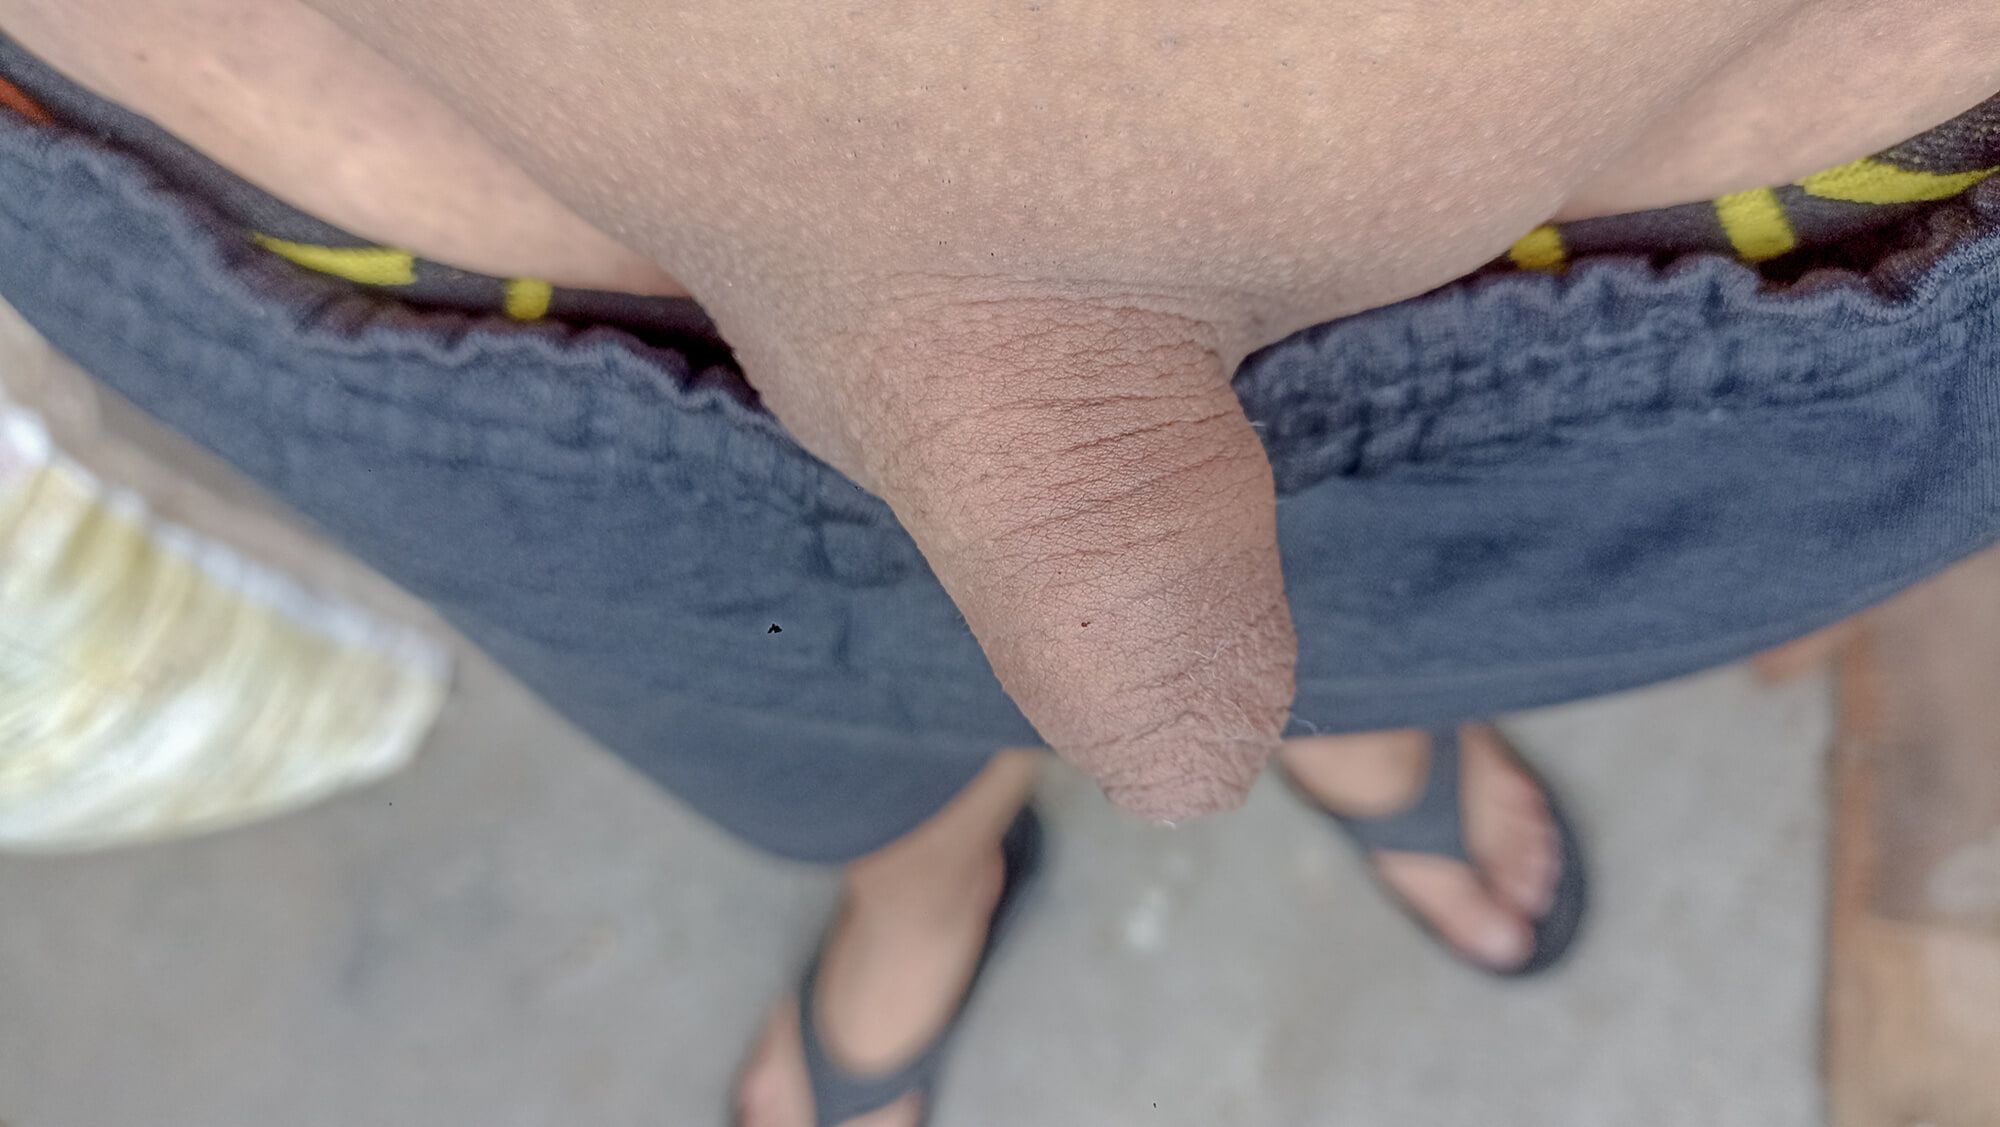 My little Flaccid Penis (without Erection) - Compilation 3 #14